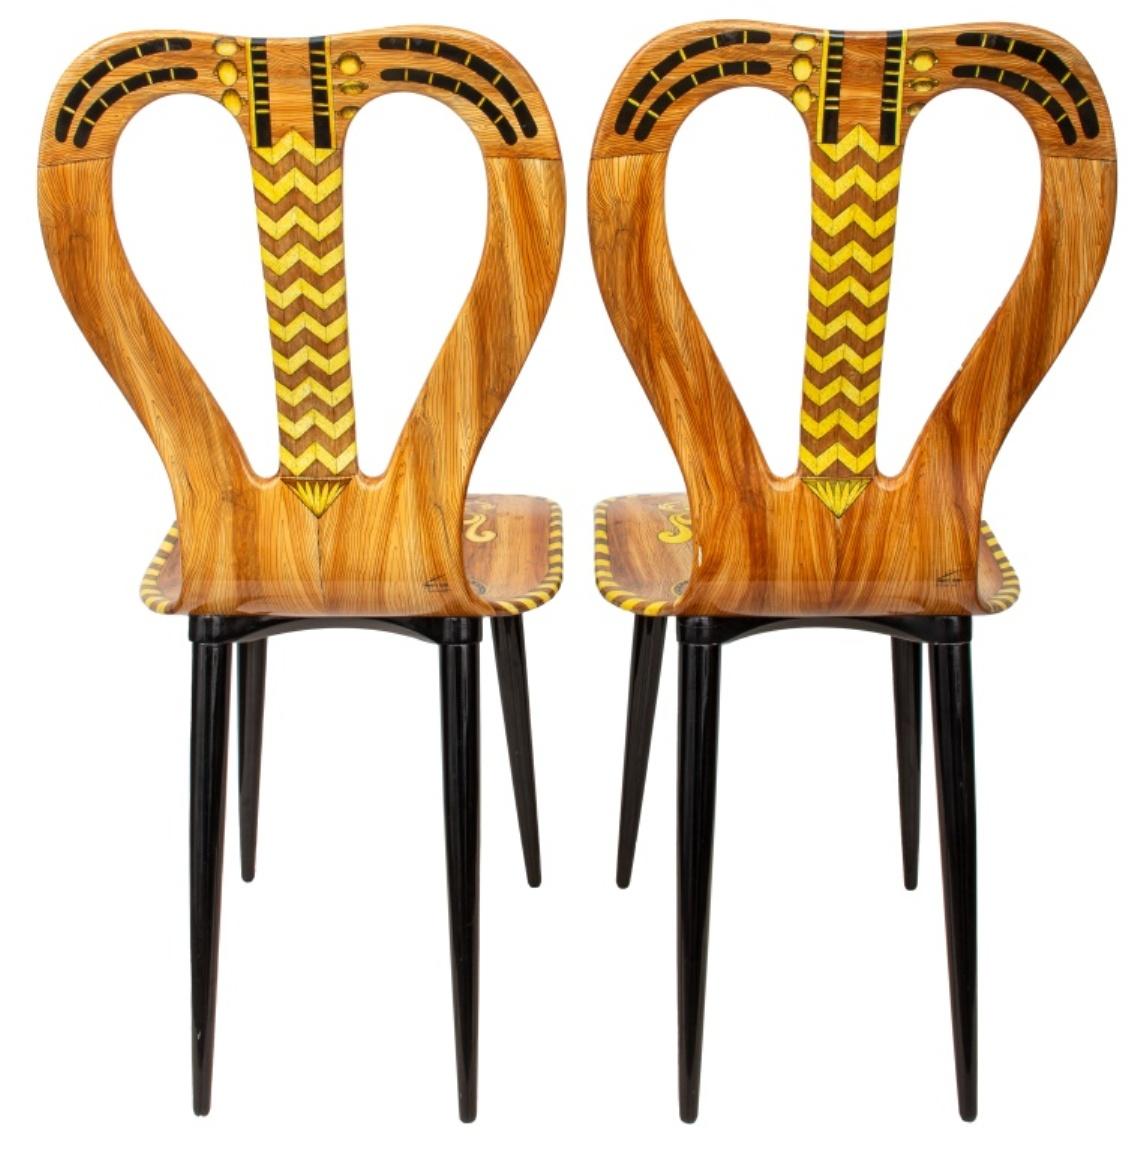 Wood Piero Fornasetti Guitar Musicale Chairs, Pair